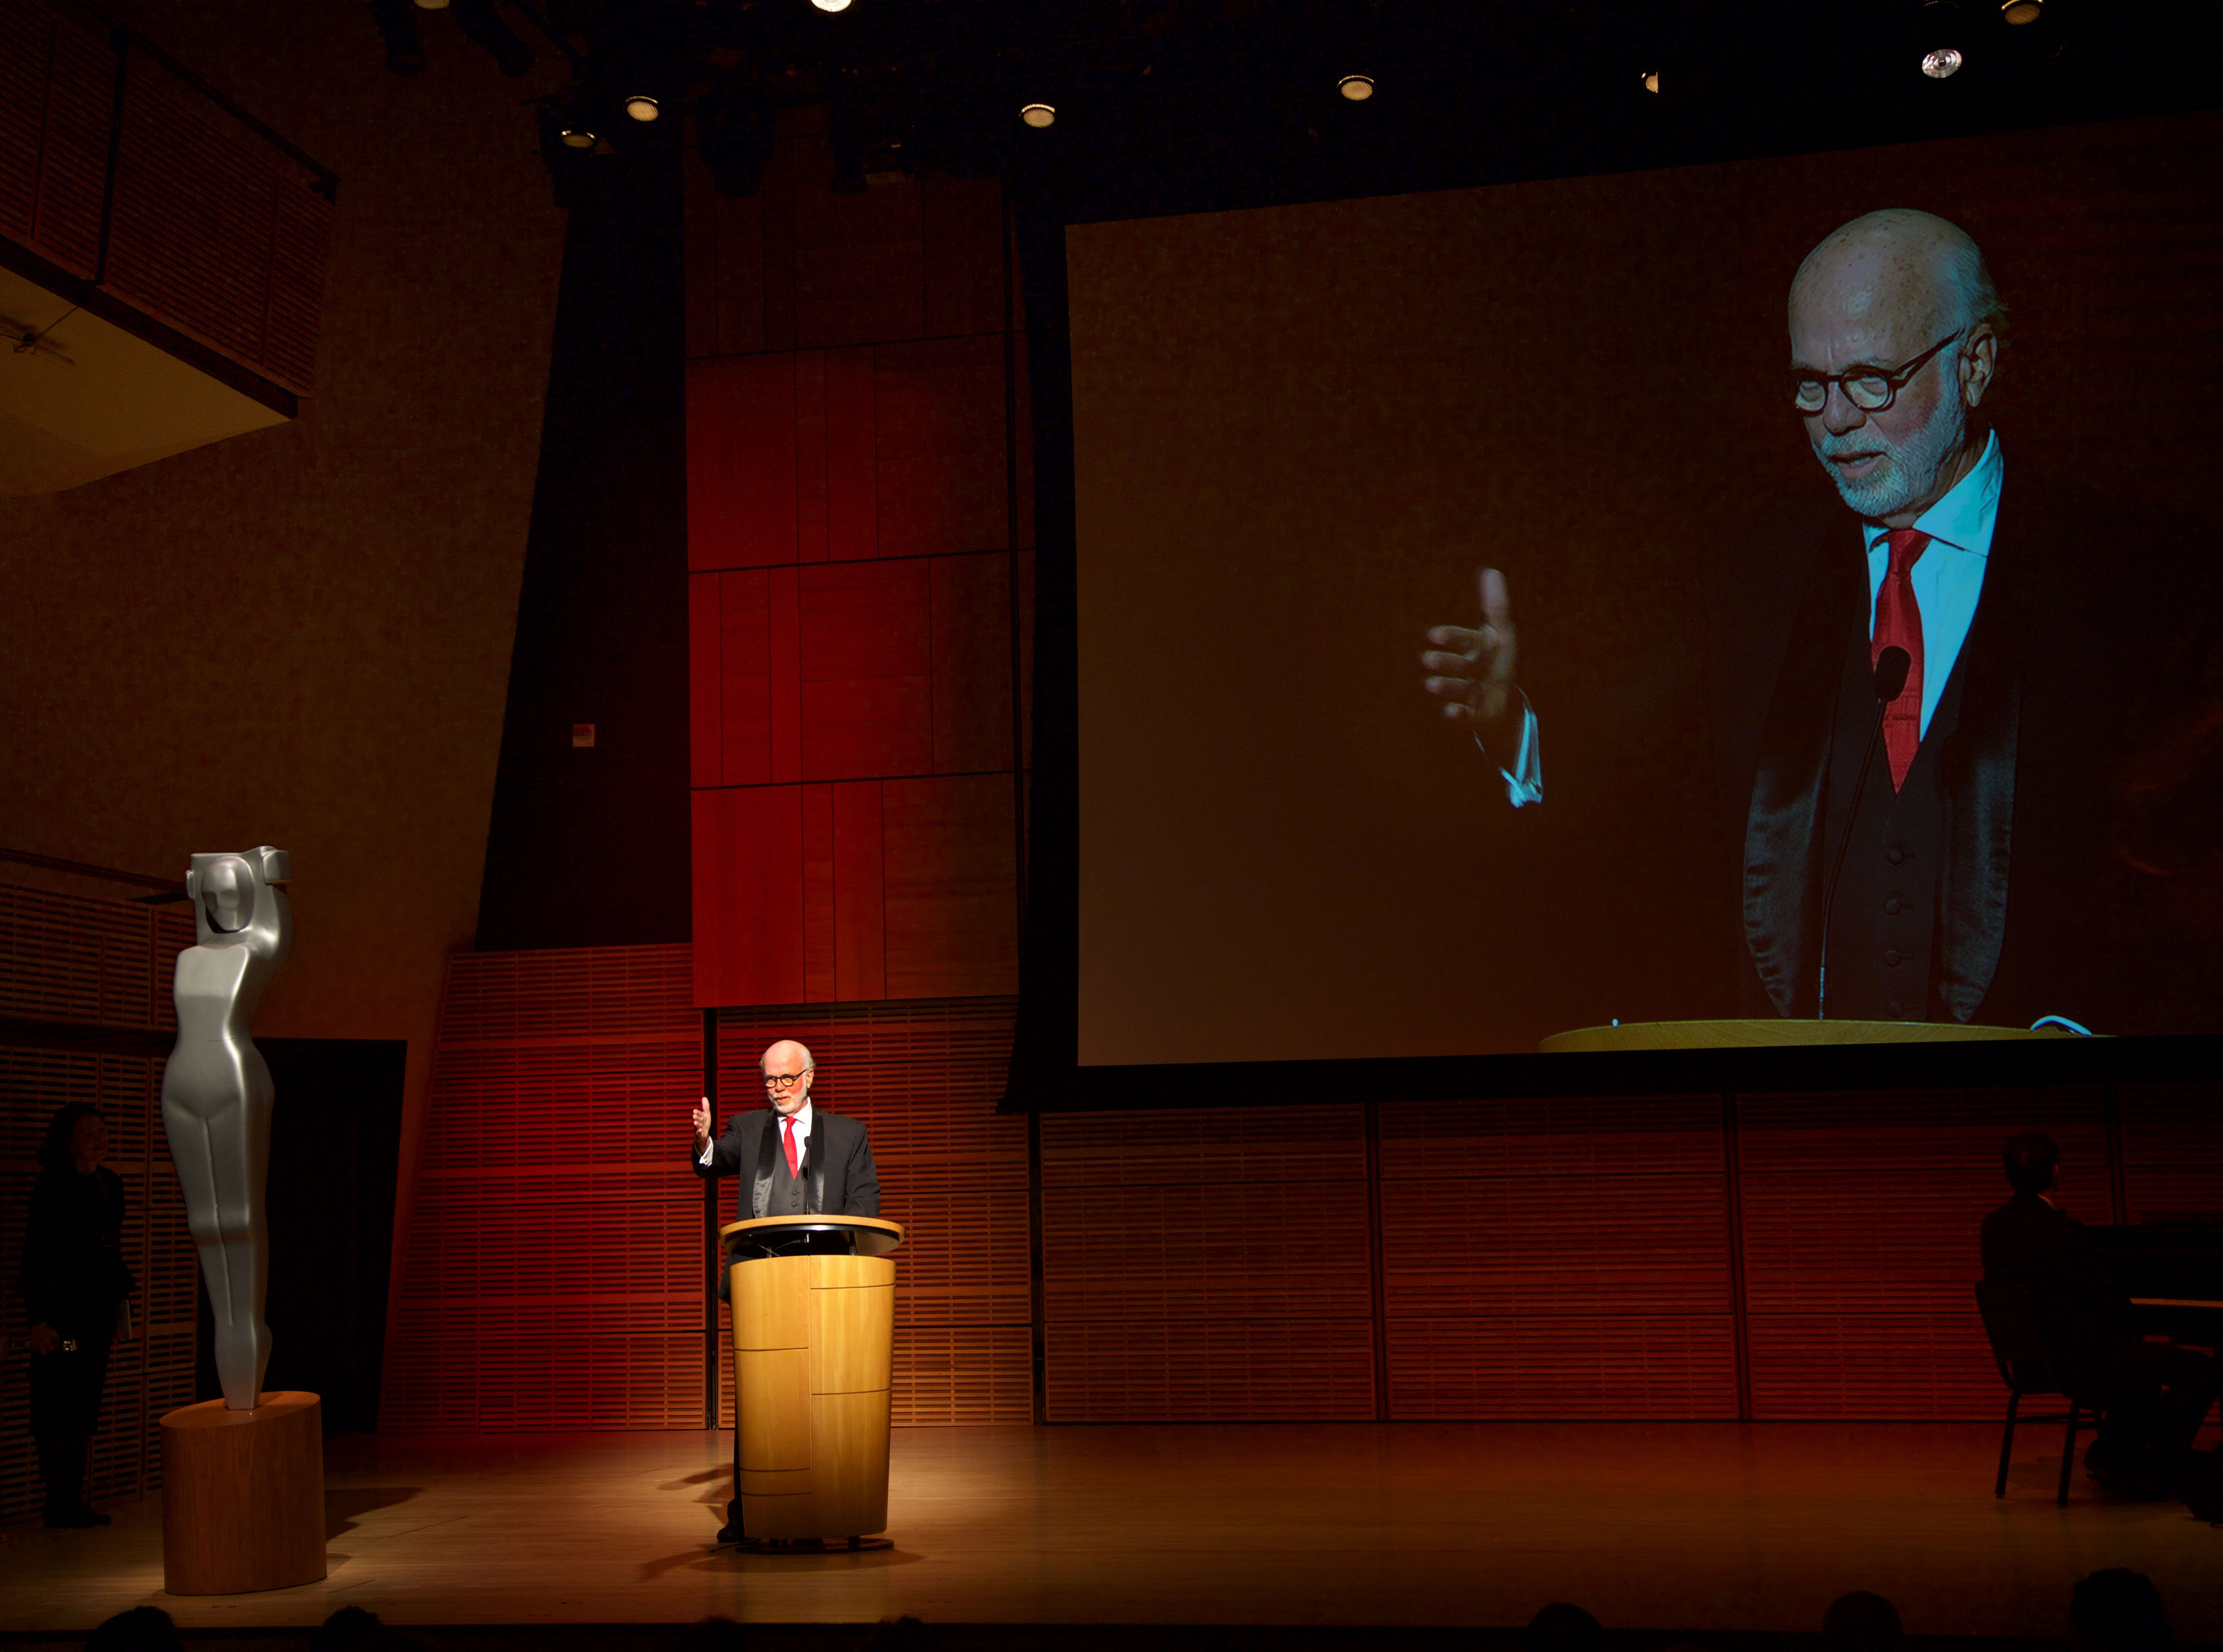 NEW YORK-- OCT 27: David Kennerly accepts The Lucie Award for Achievement in Photojournalism, Carnegie Hall, New York, New York, October 27, 2015. (Photo by Byron Hume Kennerly)